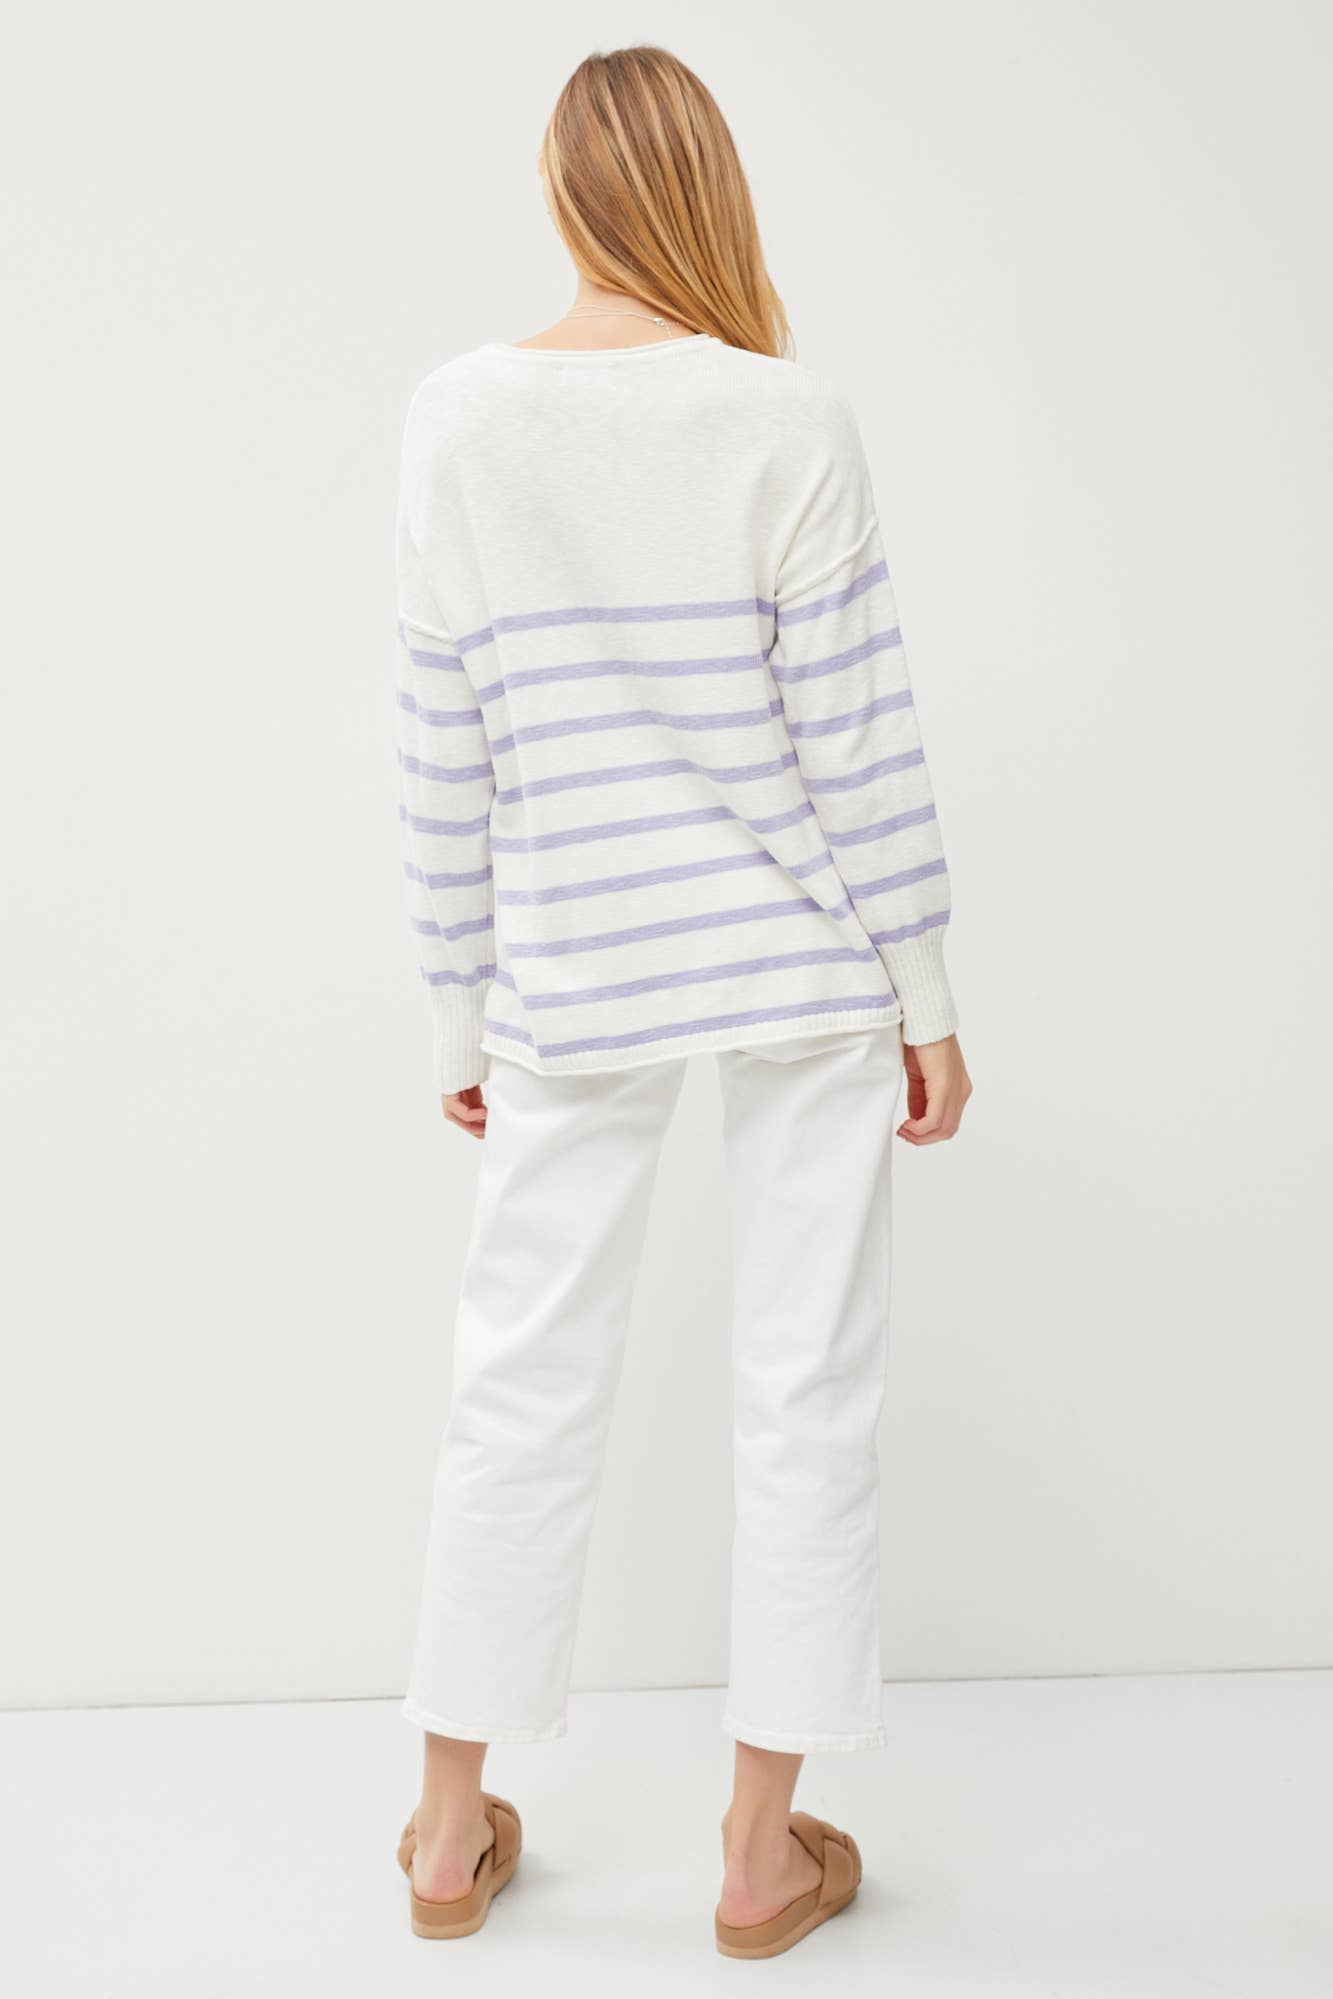 Alexis - EXPOSED SEAM SHOULDER STRIPED PULLOVER SWEATER